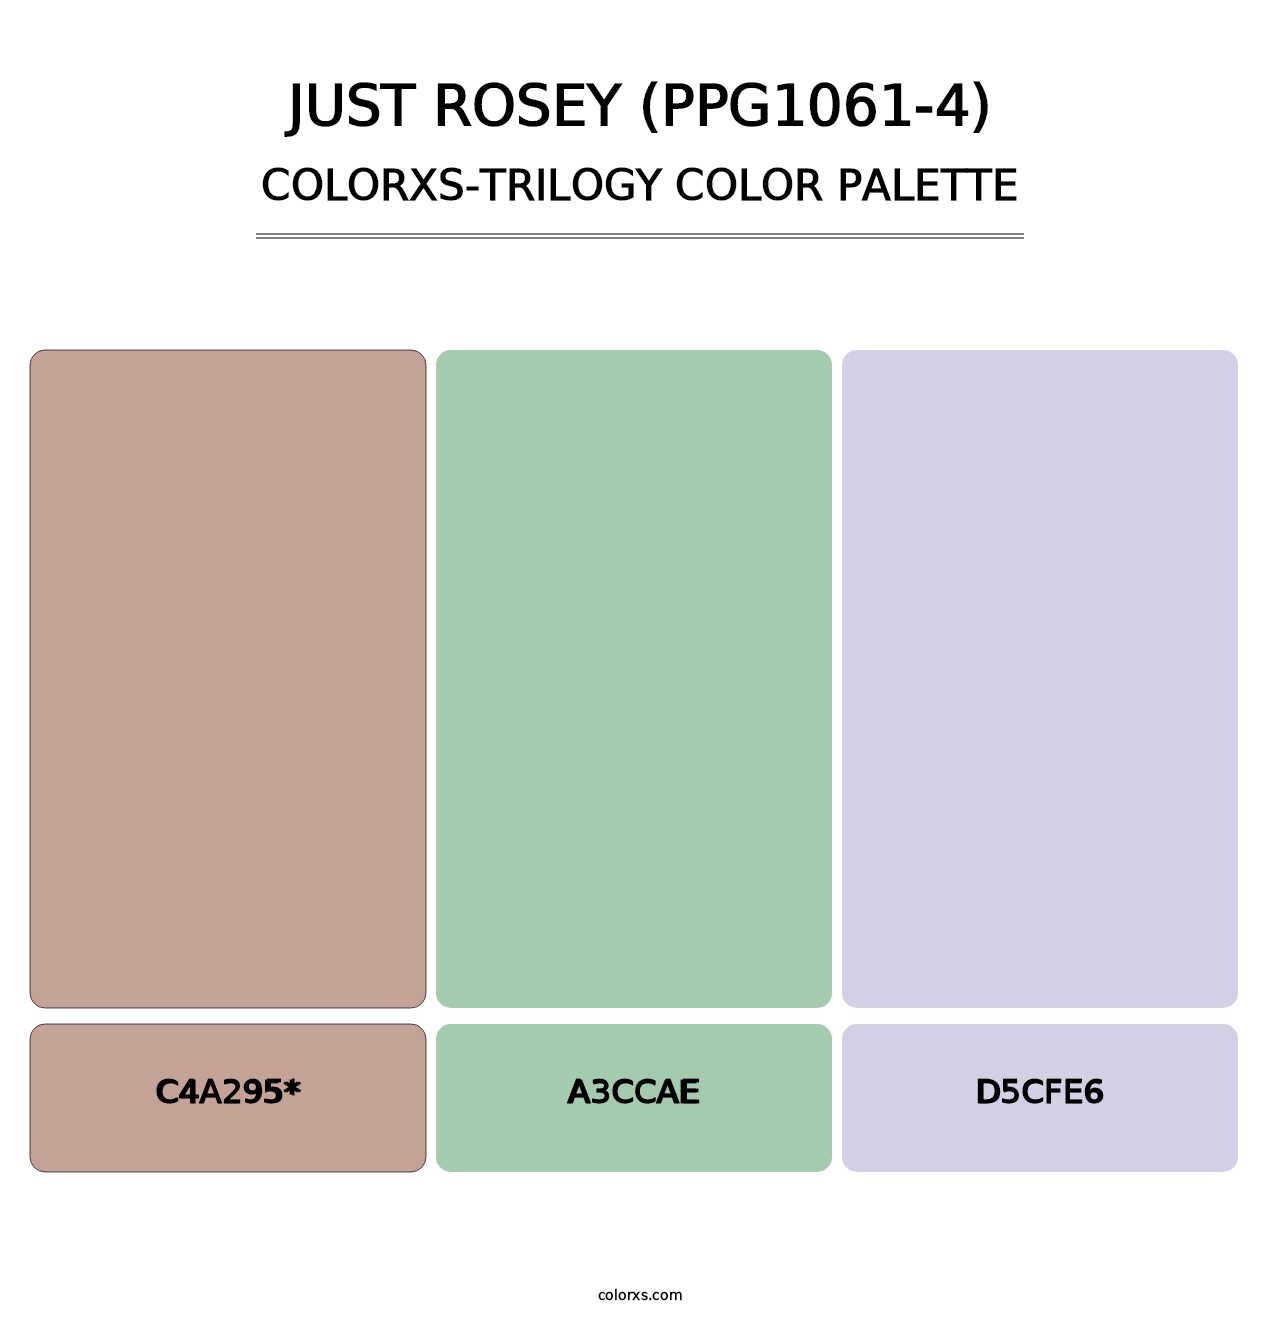 Just Rosey (PPG1061-4) - Colorxs Trilogy Palette